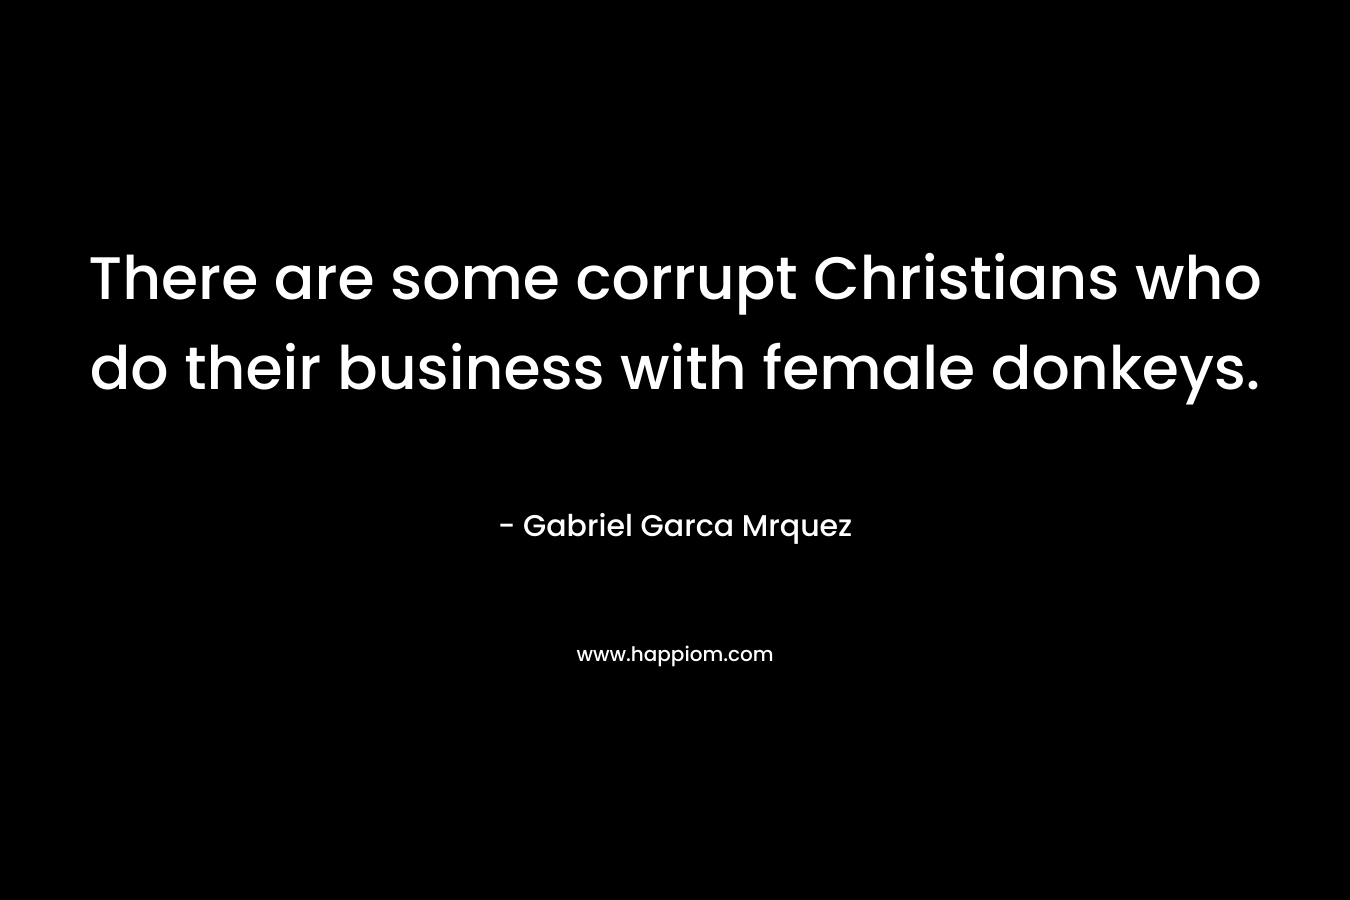 There are some corrupt Christians who do their business with female donkeys.